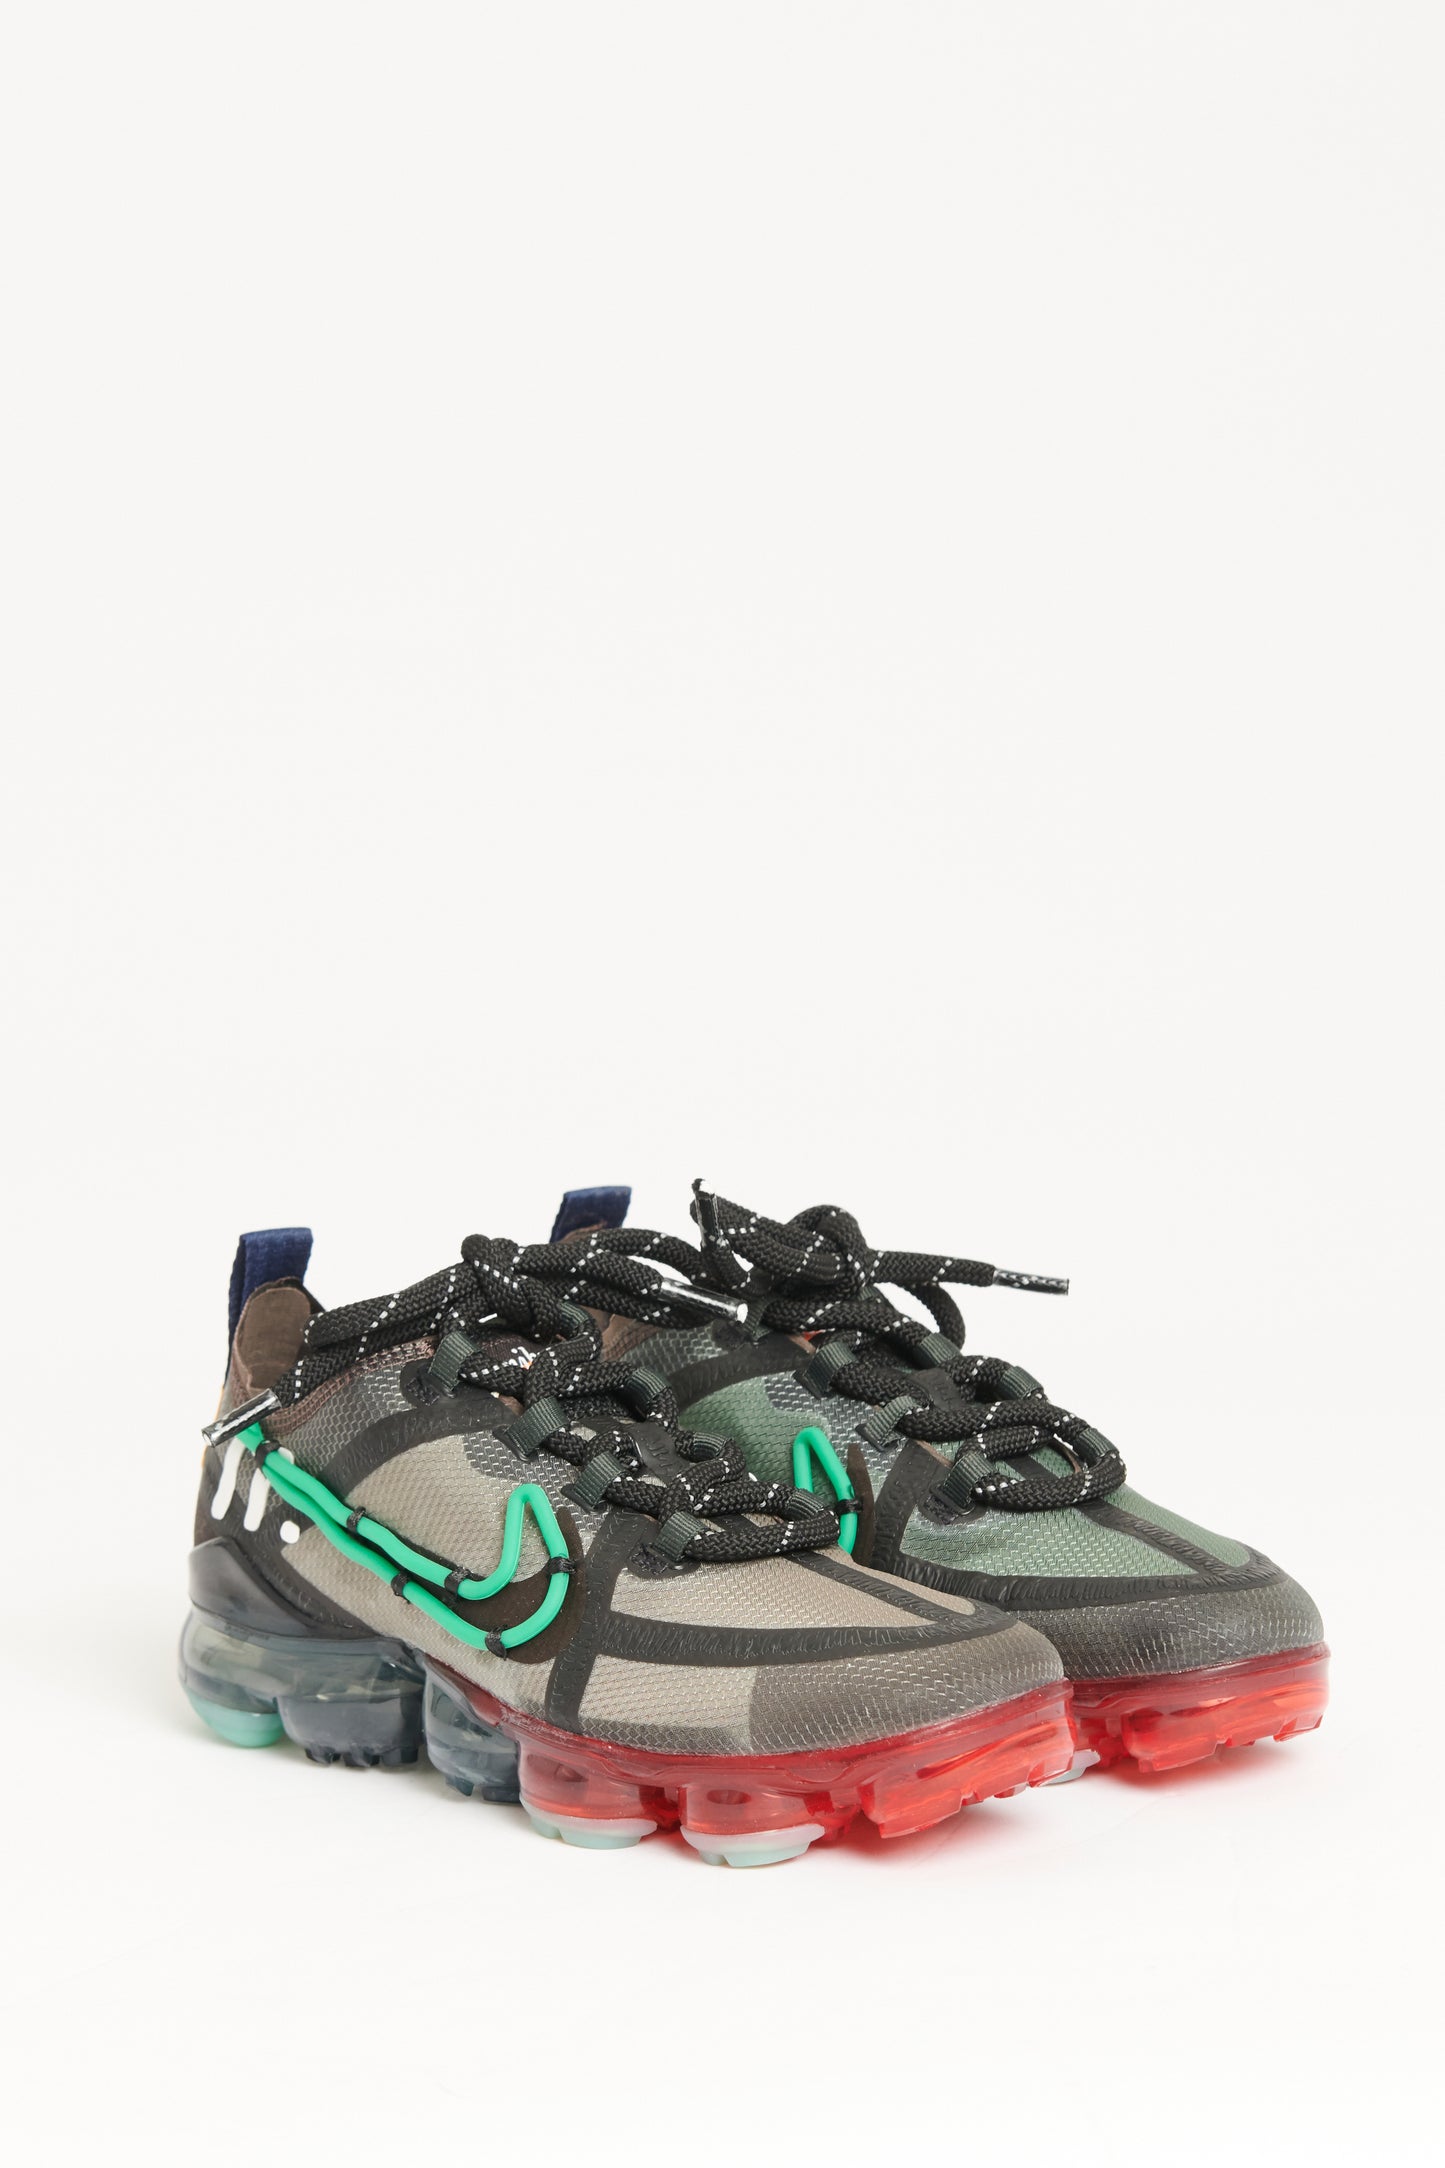 Air VaporMax x CPFM Preowned Trainers